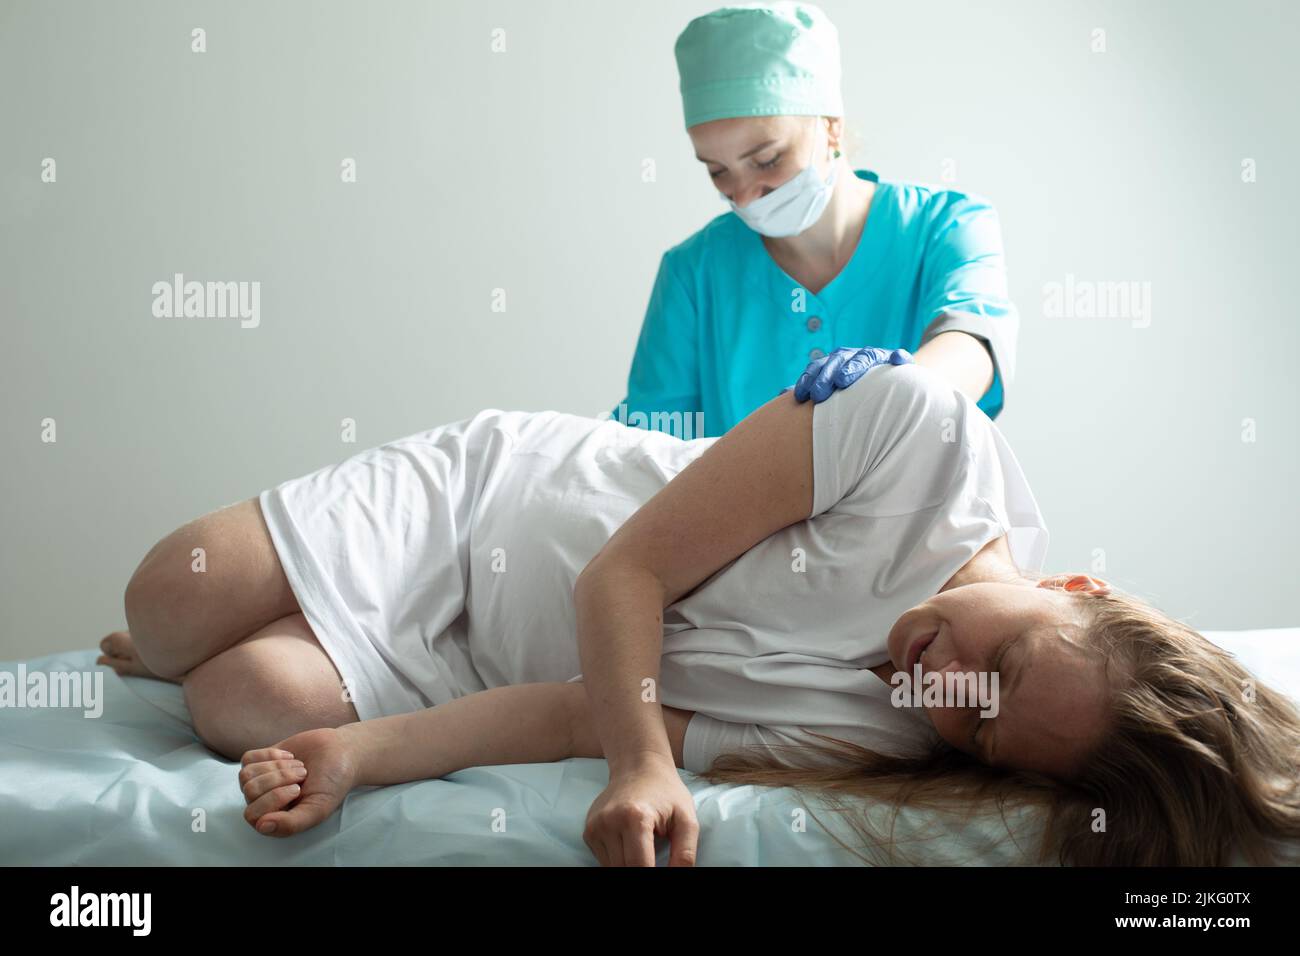 Doctor process epidural nerve block for pregnant woman Stock Photo